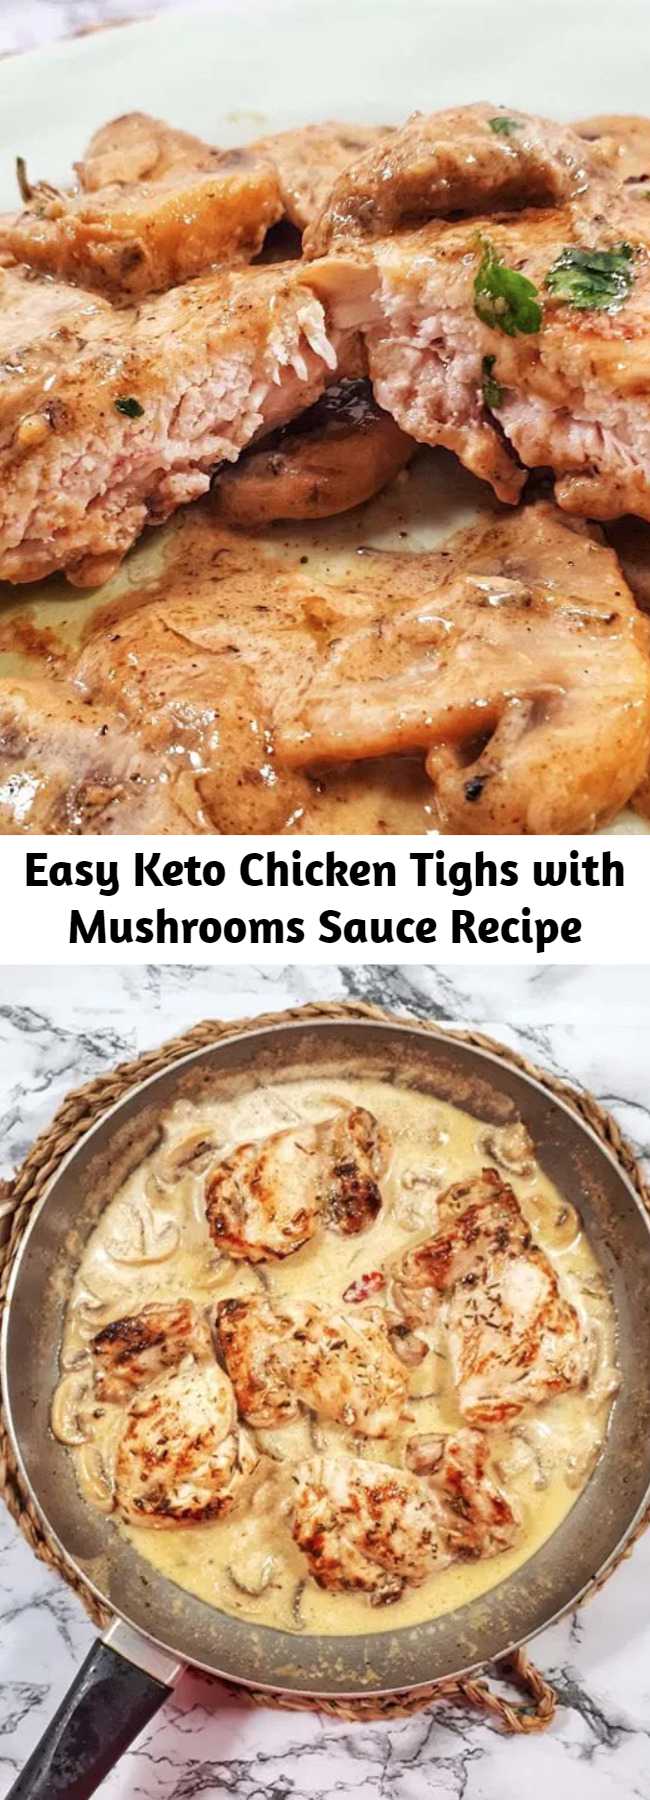 Easy Keto Chicken Tighs with Mushrooms Sauce Recipe - These boneless and skinless chicken thighs with mushrooms sauce is an easy, quick and keto recipe that´s deliciously creamy, and all made in one skillet.